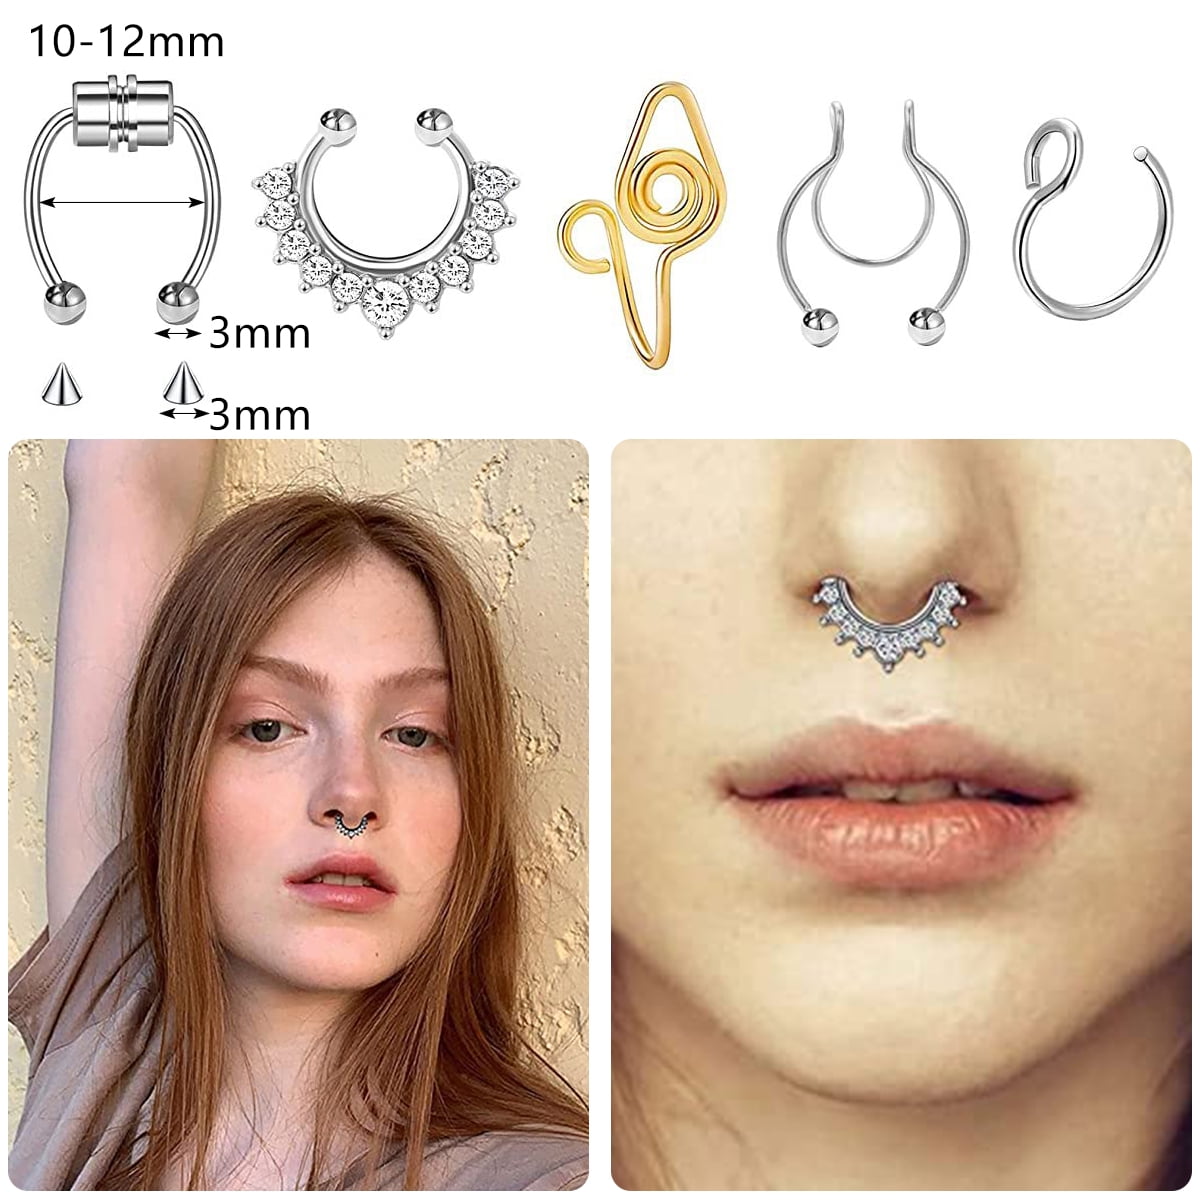 2pcs) (Black and Rose Gold) Luxury Alloy Rhinestone Fake Nose Ring Piercing  Jewelry Zircon Clear Crystal